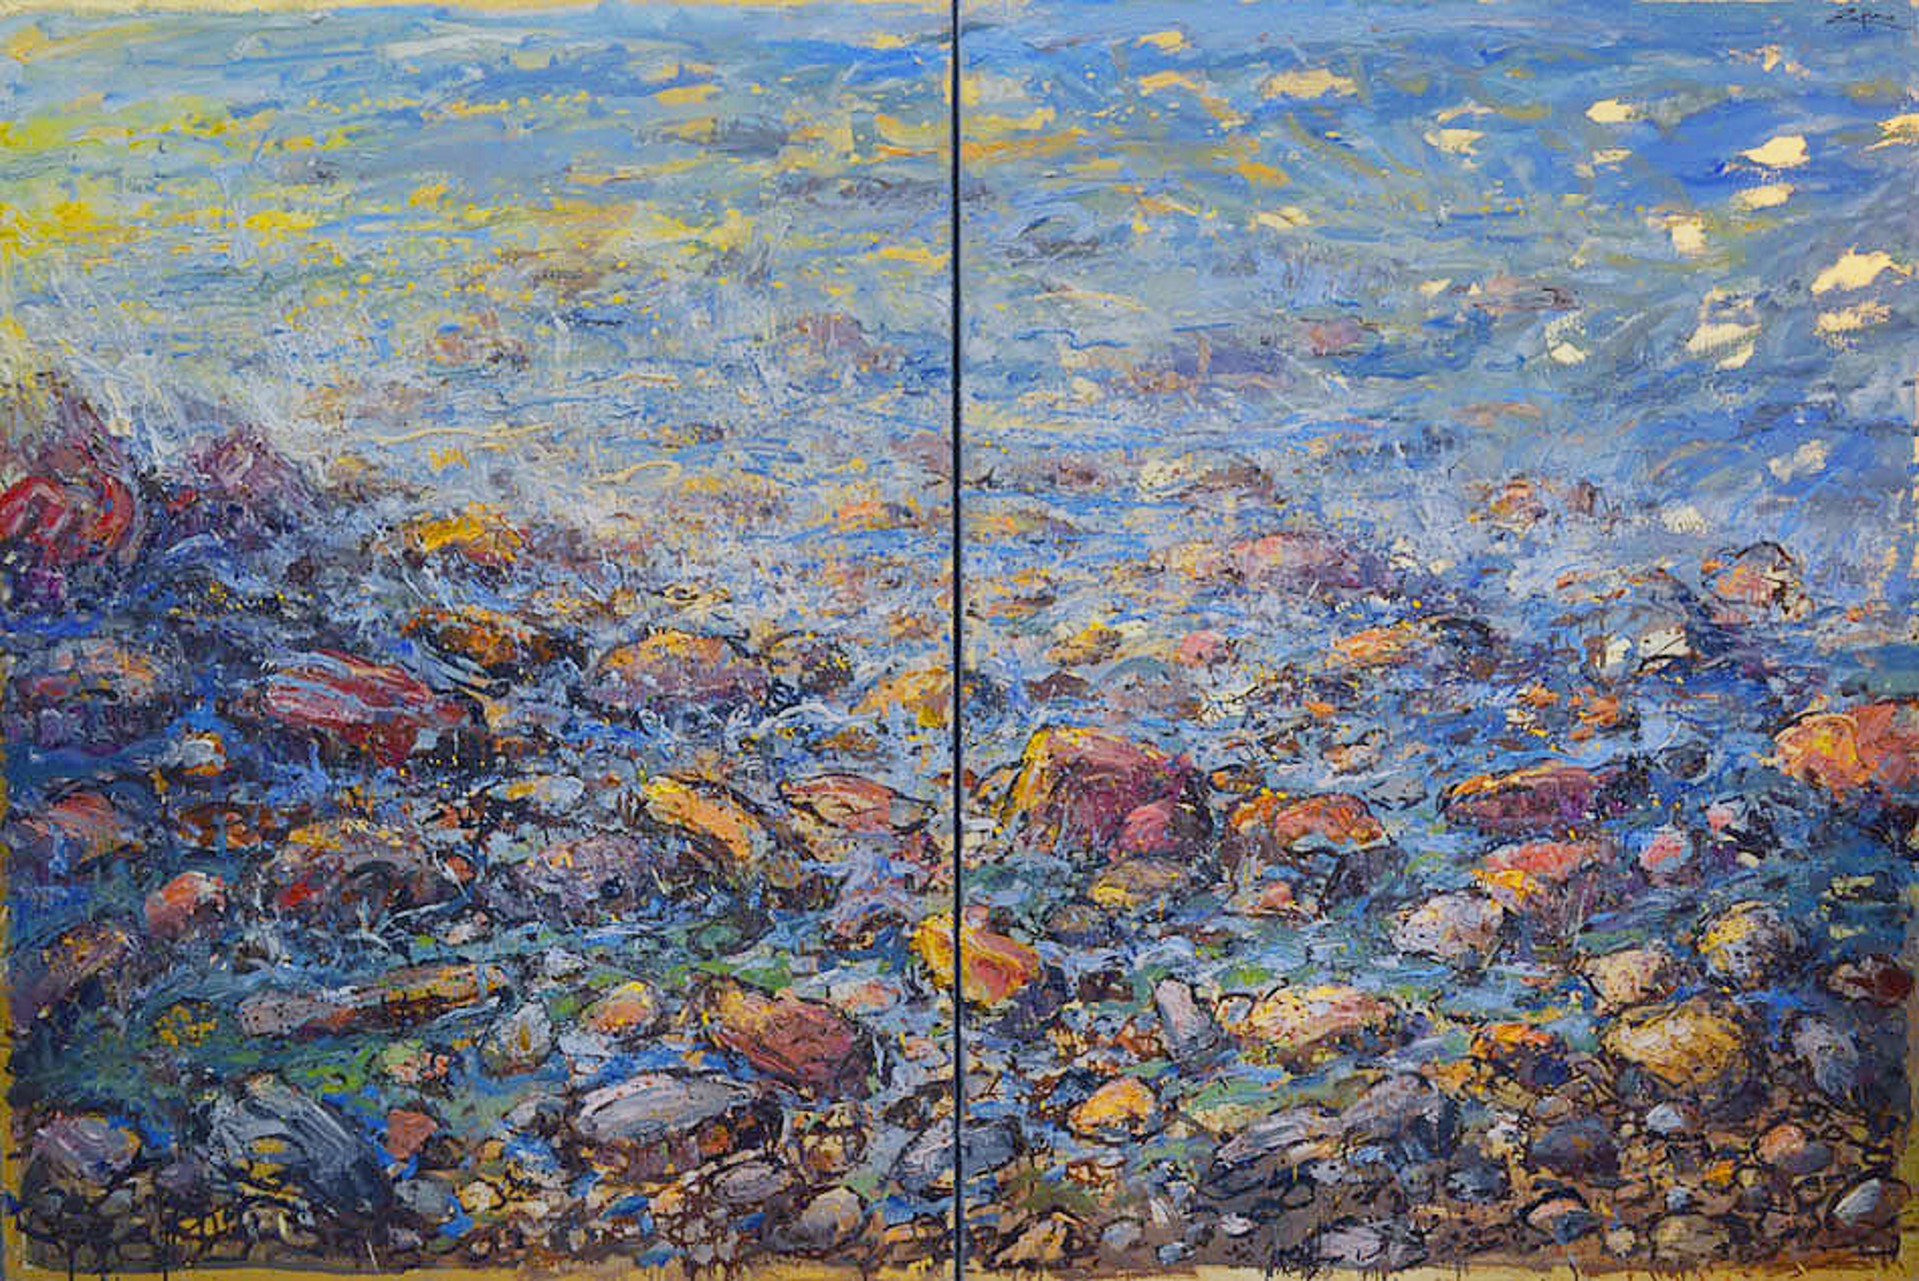 Rocks and Sea: diptych by Bruno Zupan